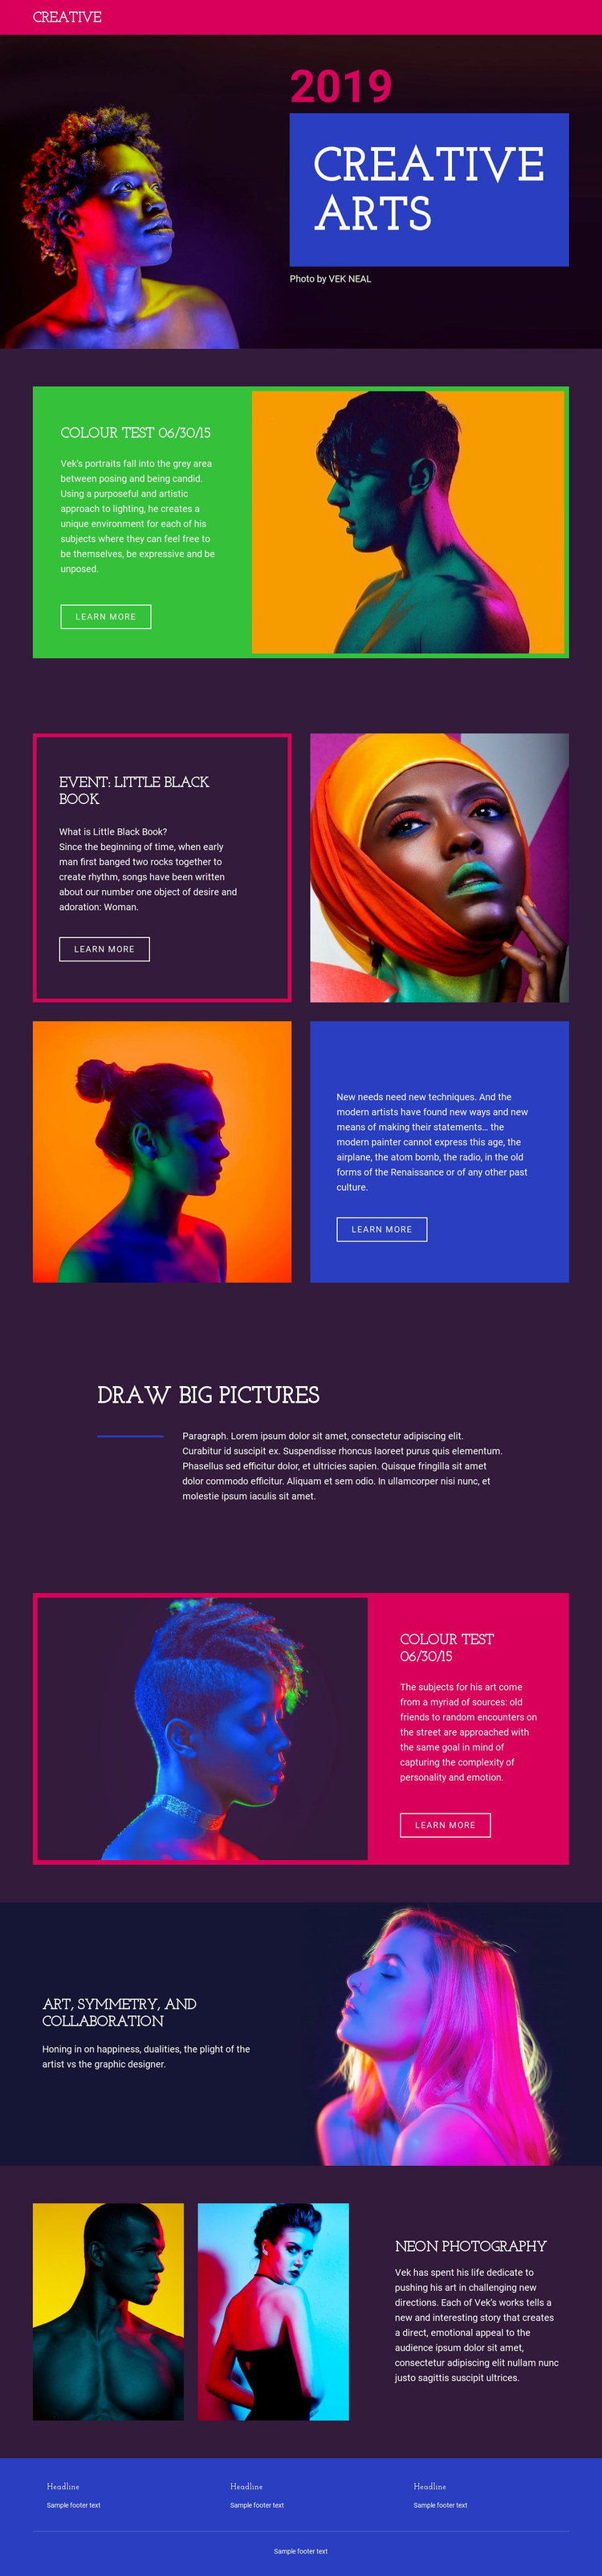 Limited-edition photography Squarespace Template Alternative